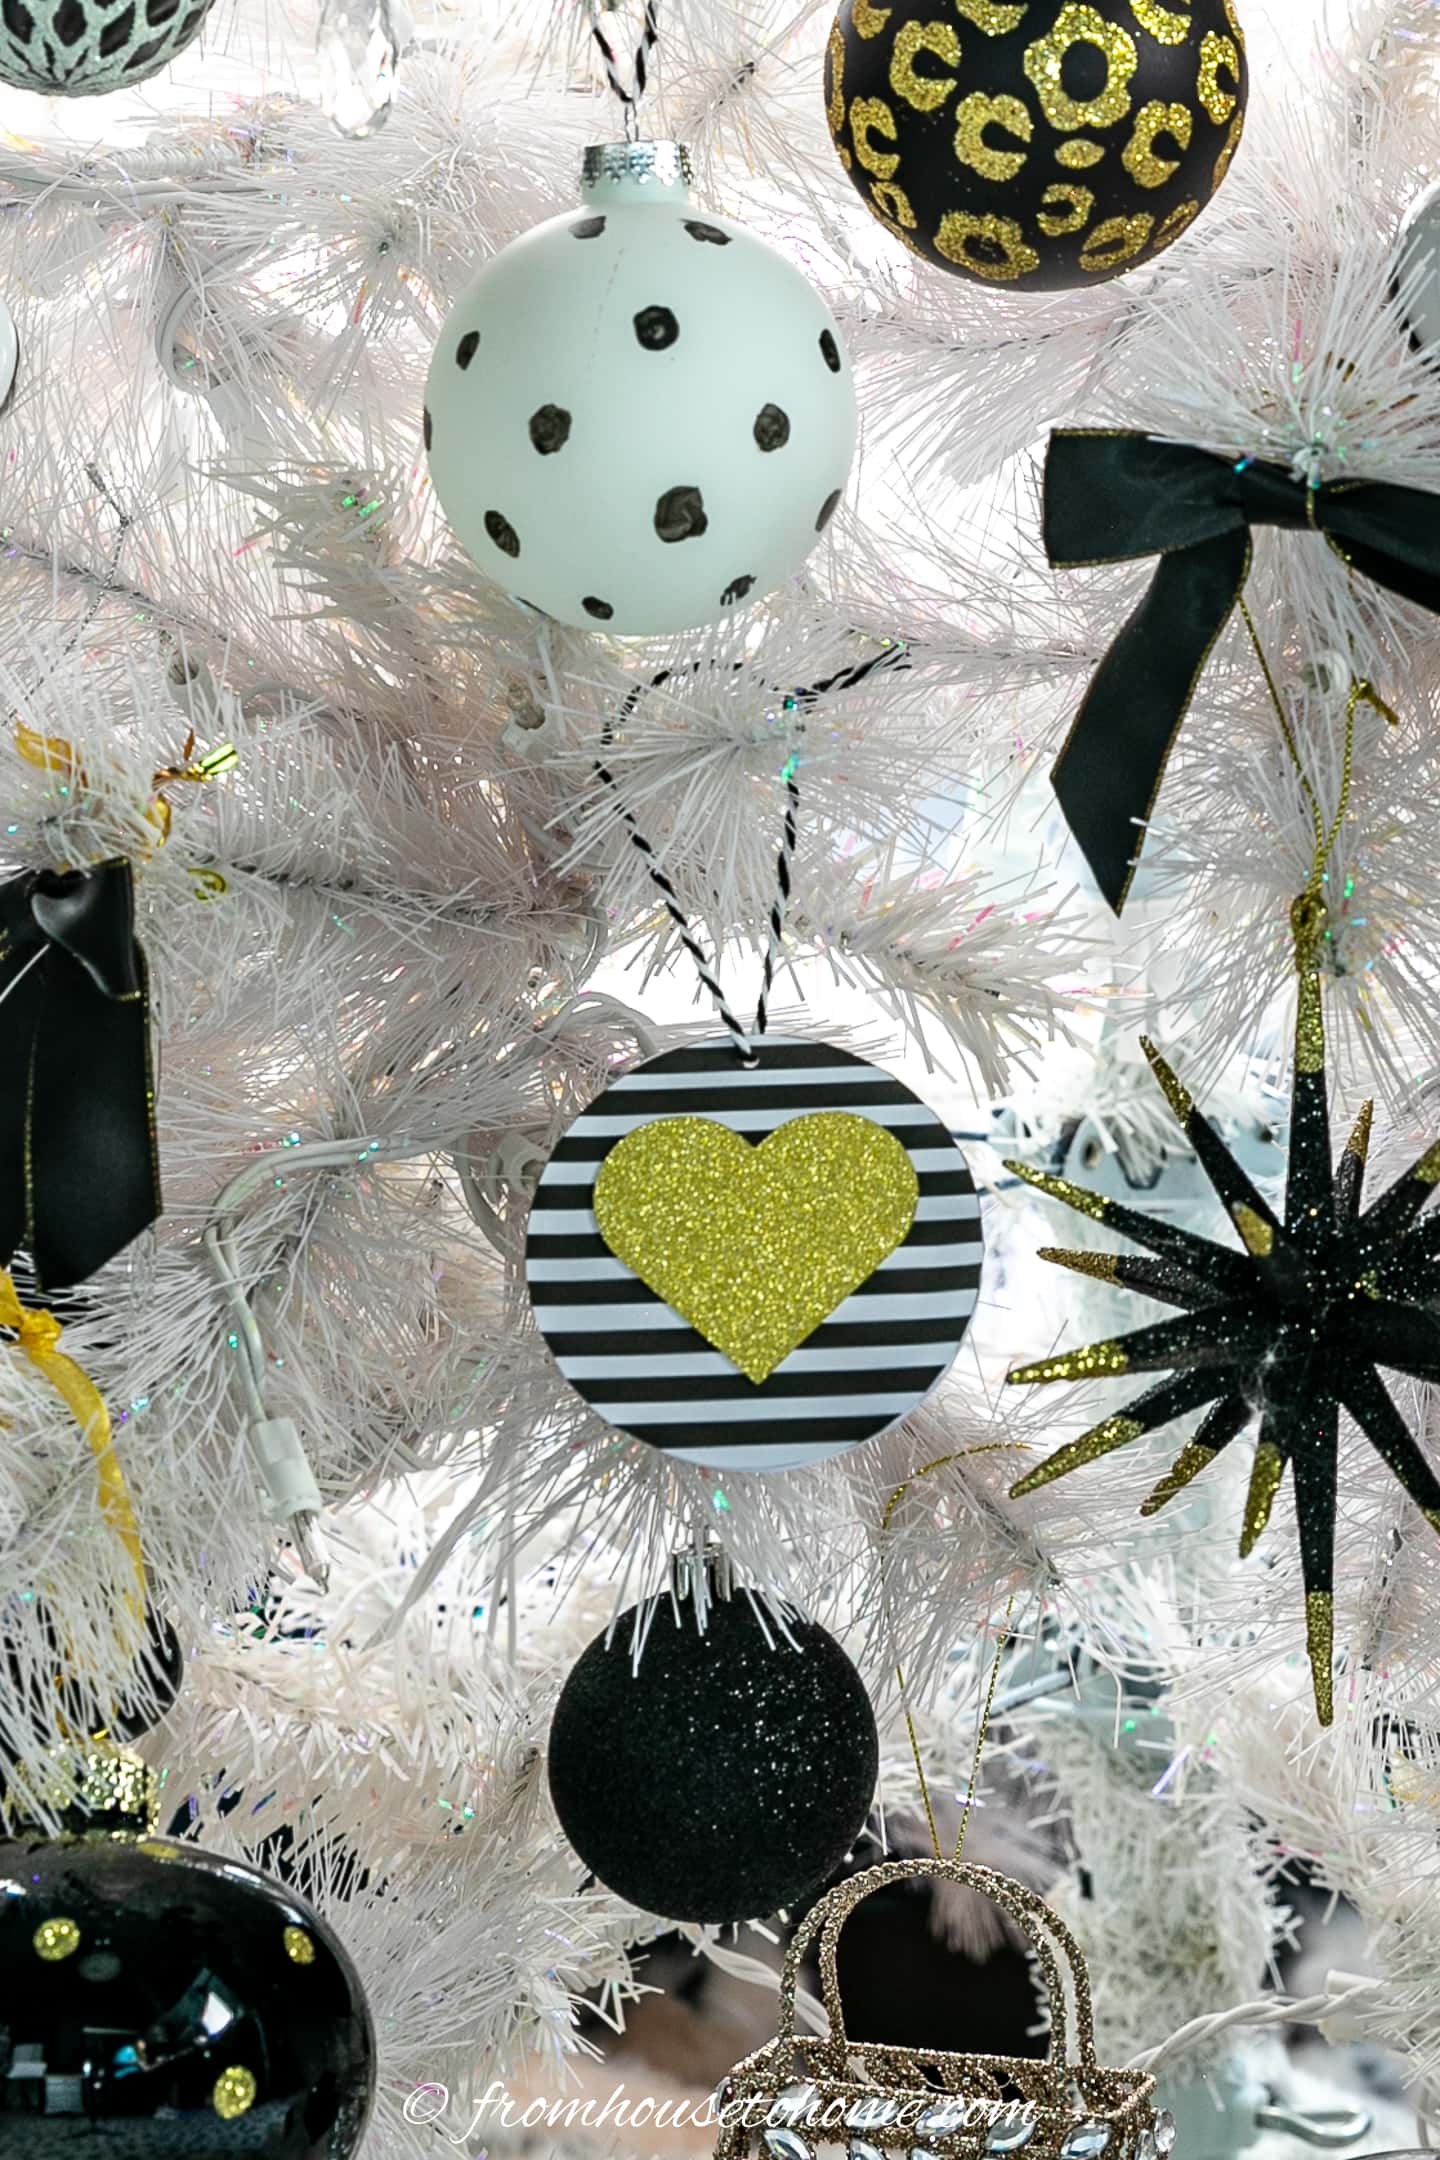 White Christmas tree decorated with a black and white striped round ornament with a gold heart in the middle